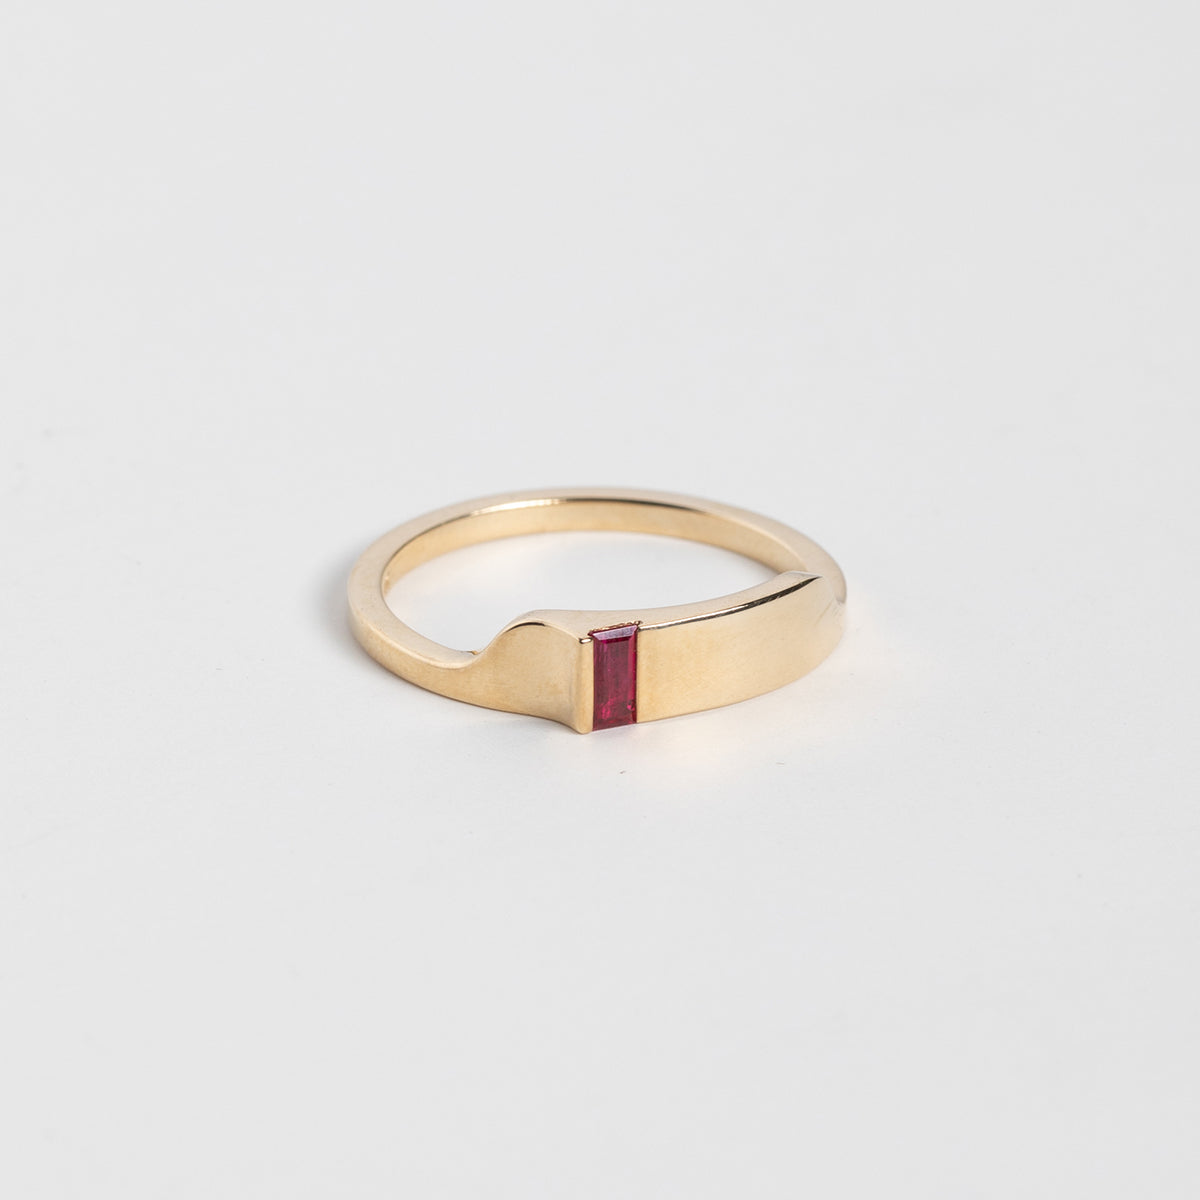 Unique Tylu Ring with precious ethical ruby gemstone set in 14 karat yellow gold made in NYC by SHW Fine Jewelry